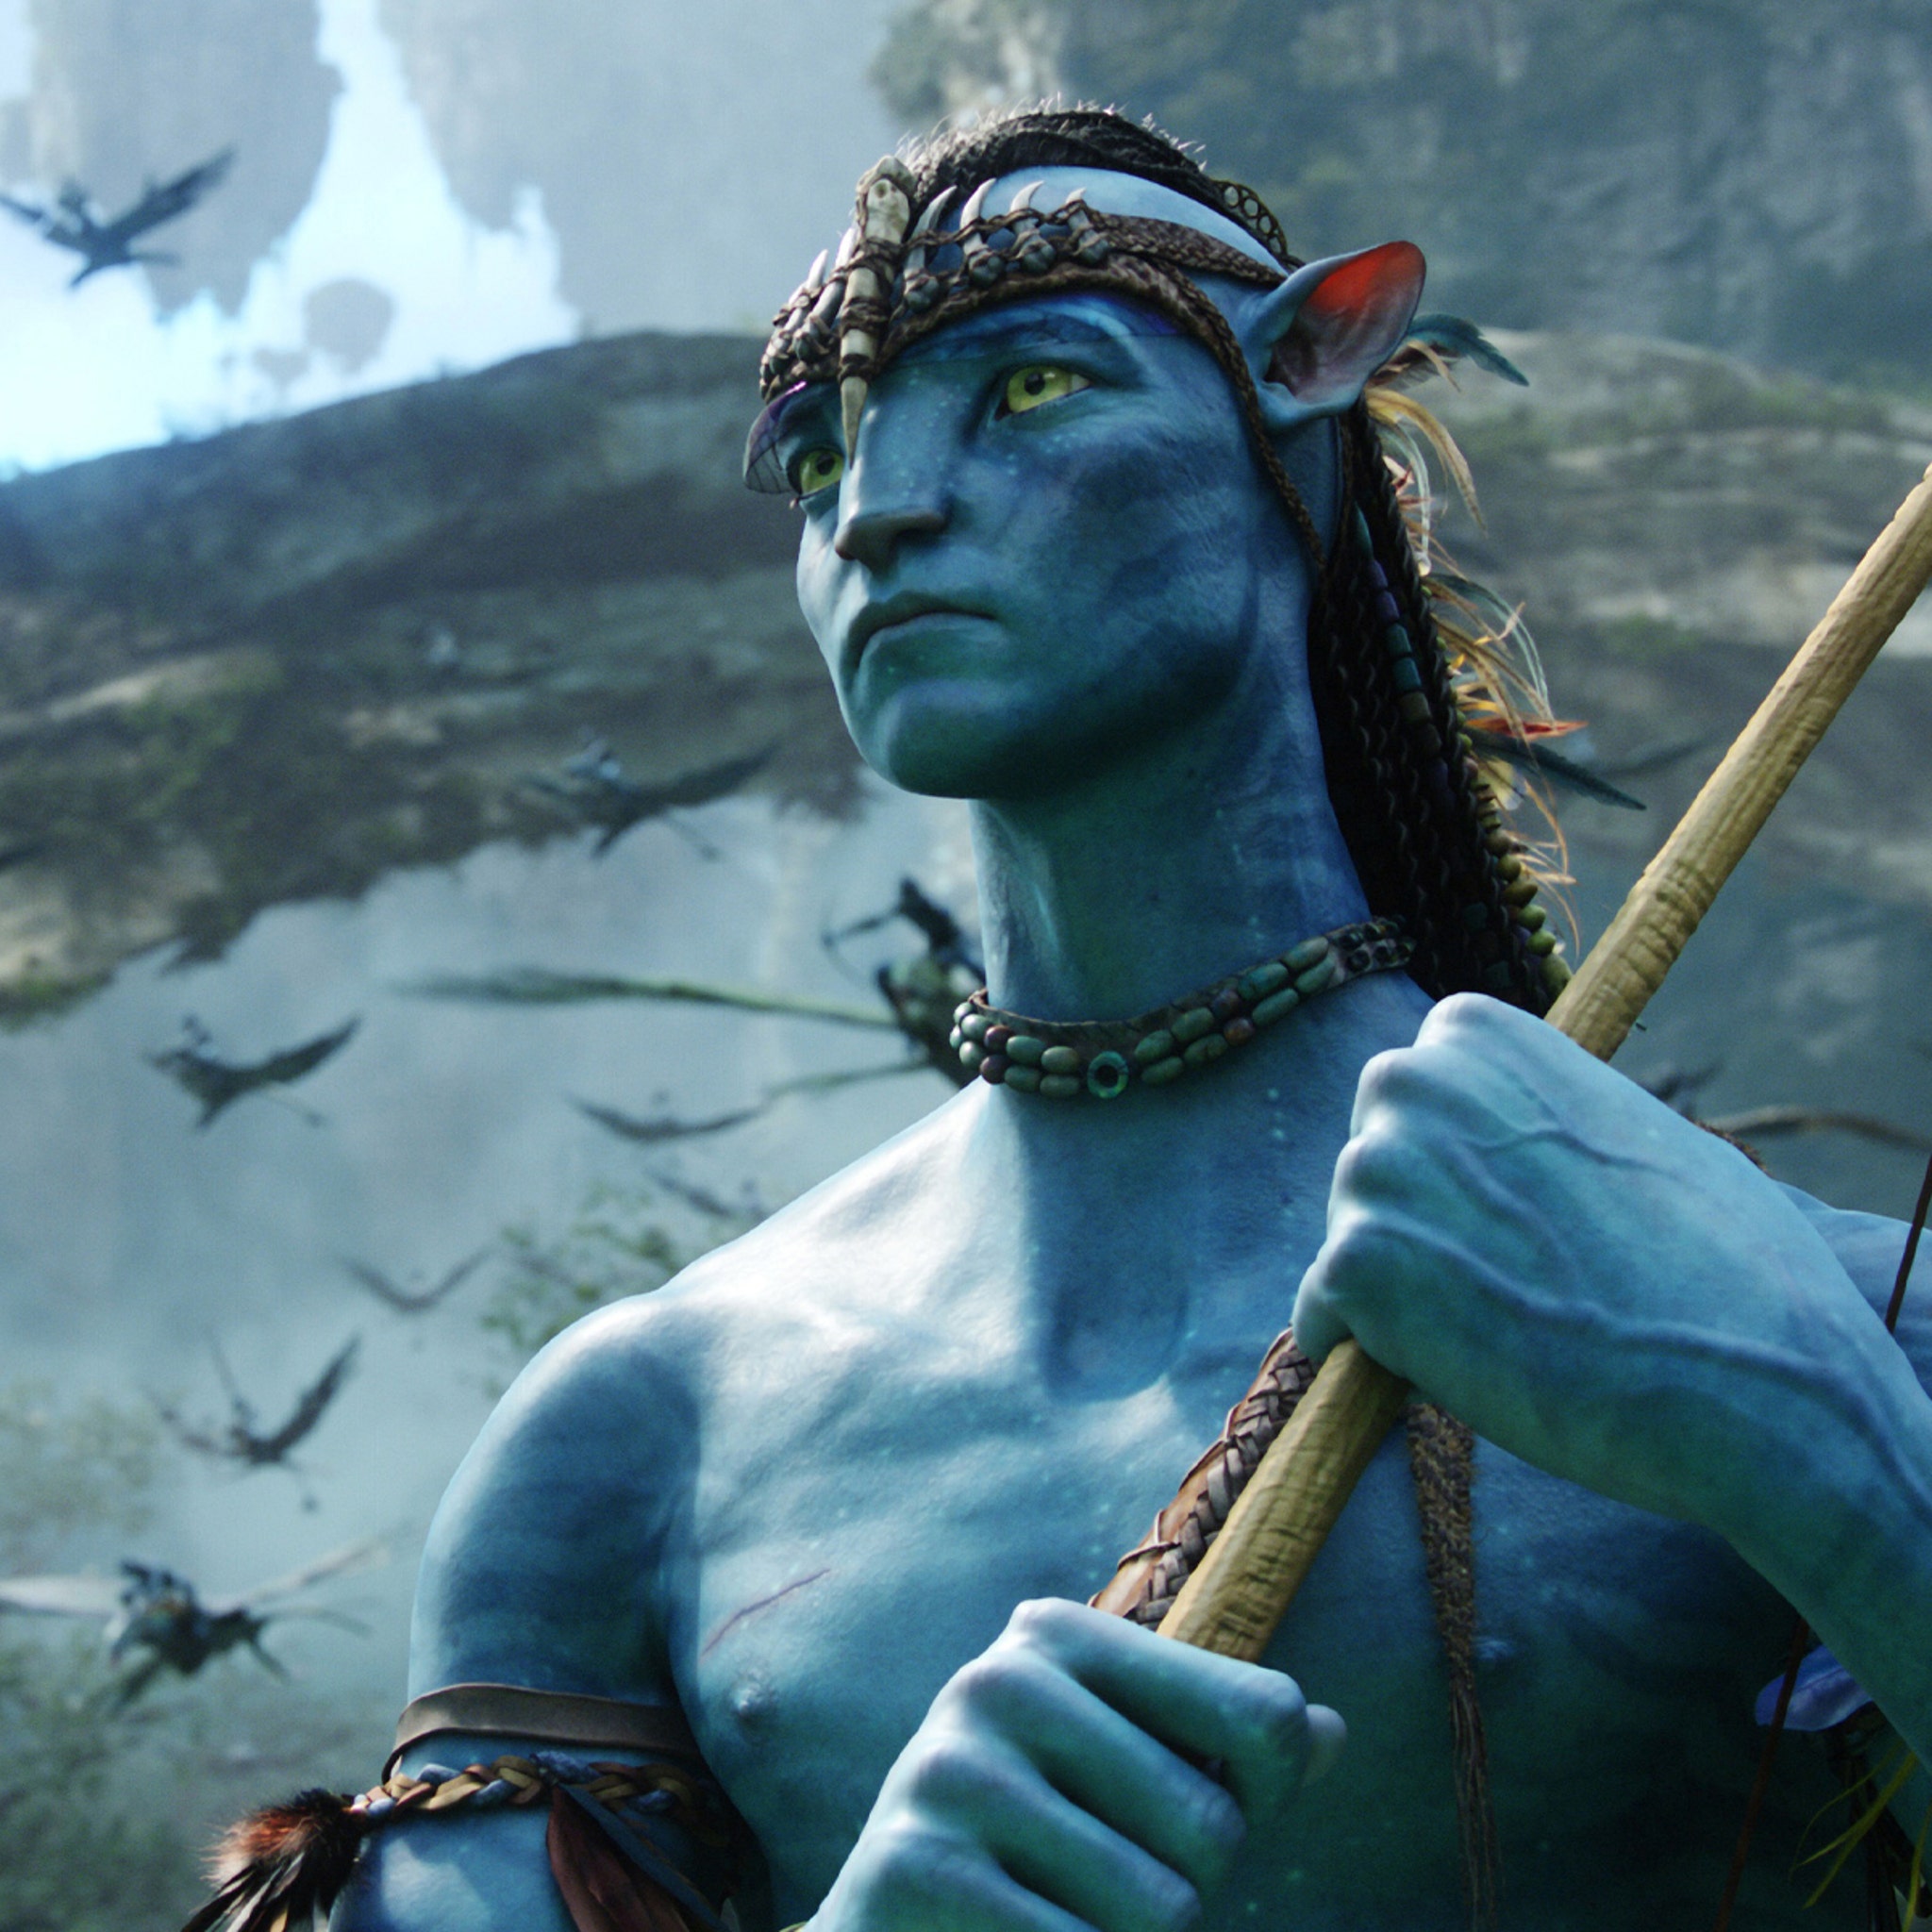 Disney Reveals Avatar 2 Details at CinemaCon, Unveil Film's Title: Avatar: The Way of Water